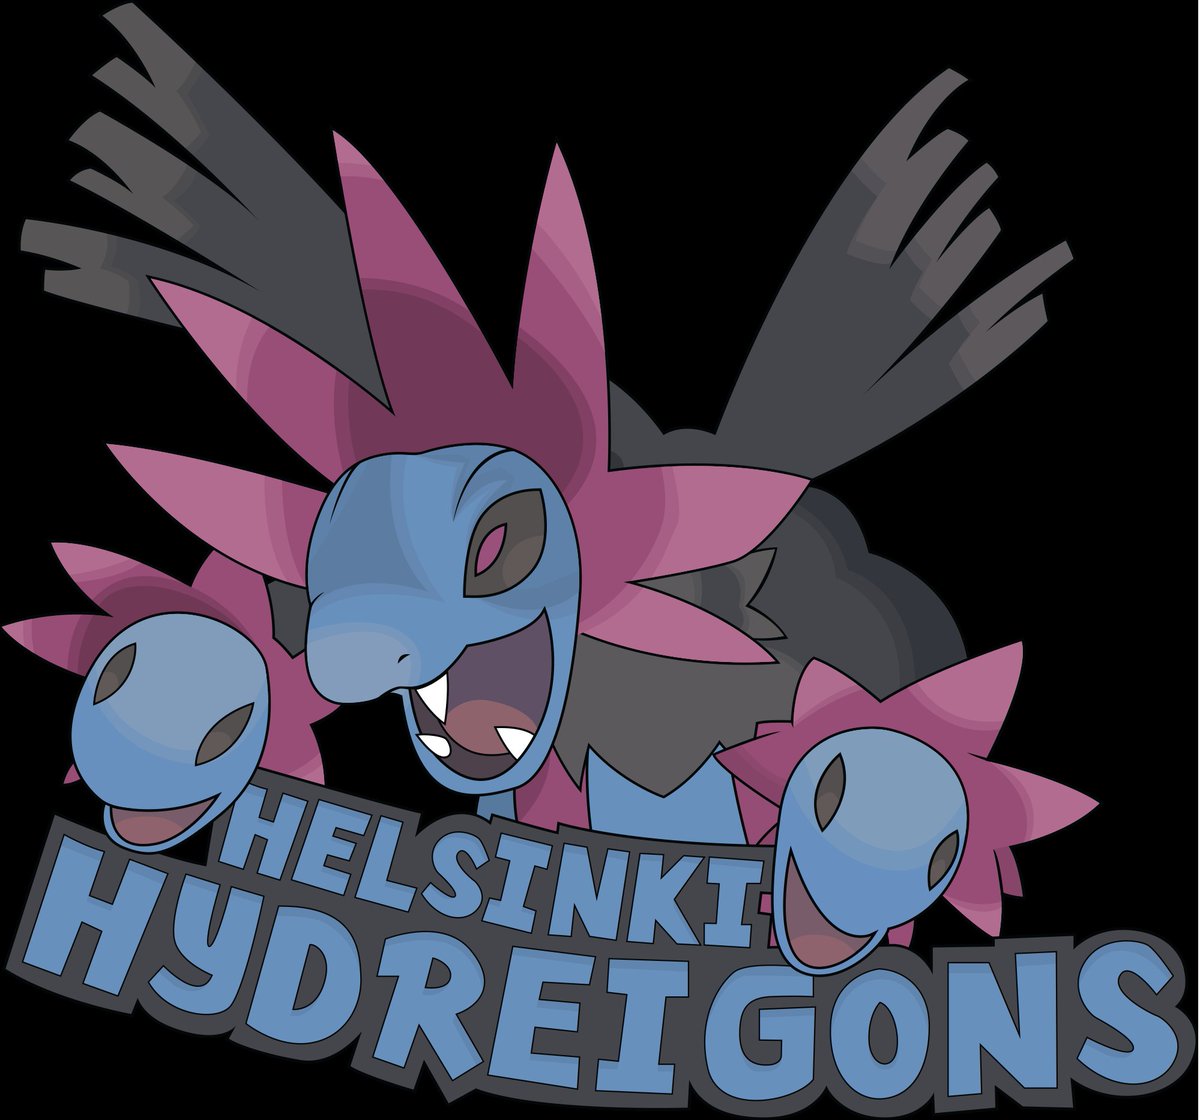 HE'S BACK, LITTLE DEINOS! It's @Vepsis_, coach of the Helsinki Hydreigons - known for his back to back @UBLPokemon championships, and his defensive to balance playstyle. Now that he's rested back to full health, Vepsis is ready to kick it in gear and make a run in CGT! https://t.co/DRnGQd7XL1